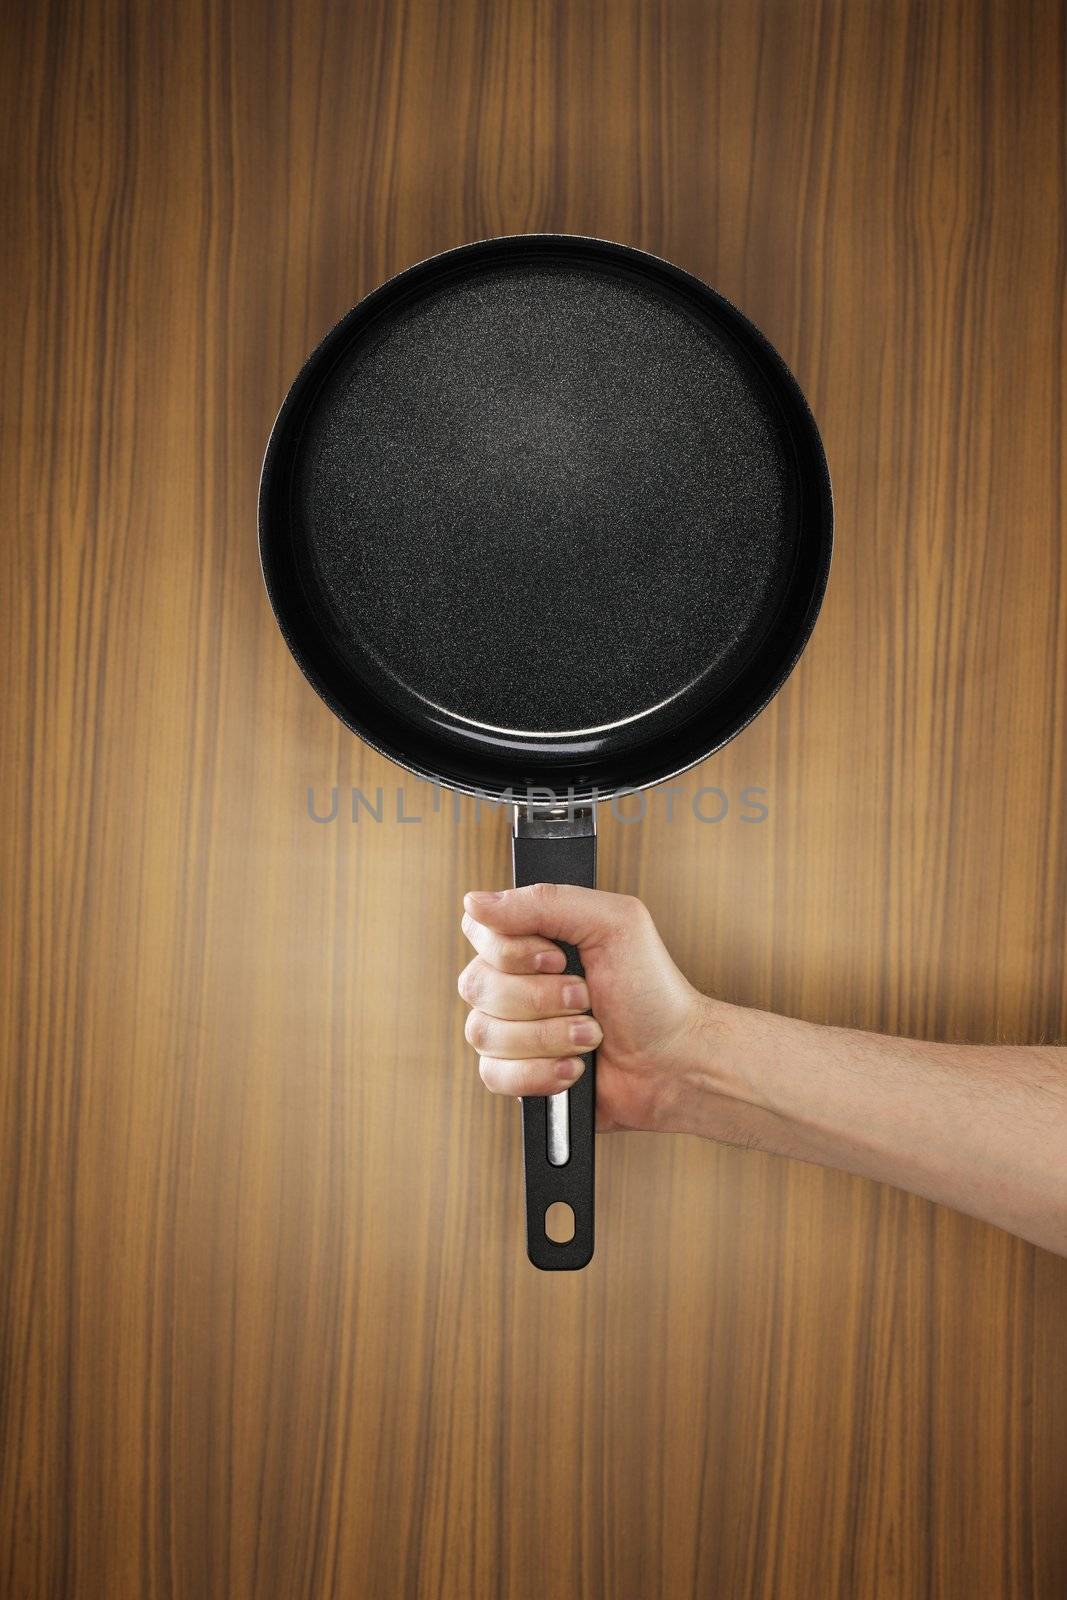 Man holding a saucepan which has a ceramic non-stick coating